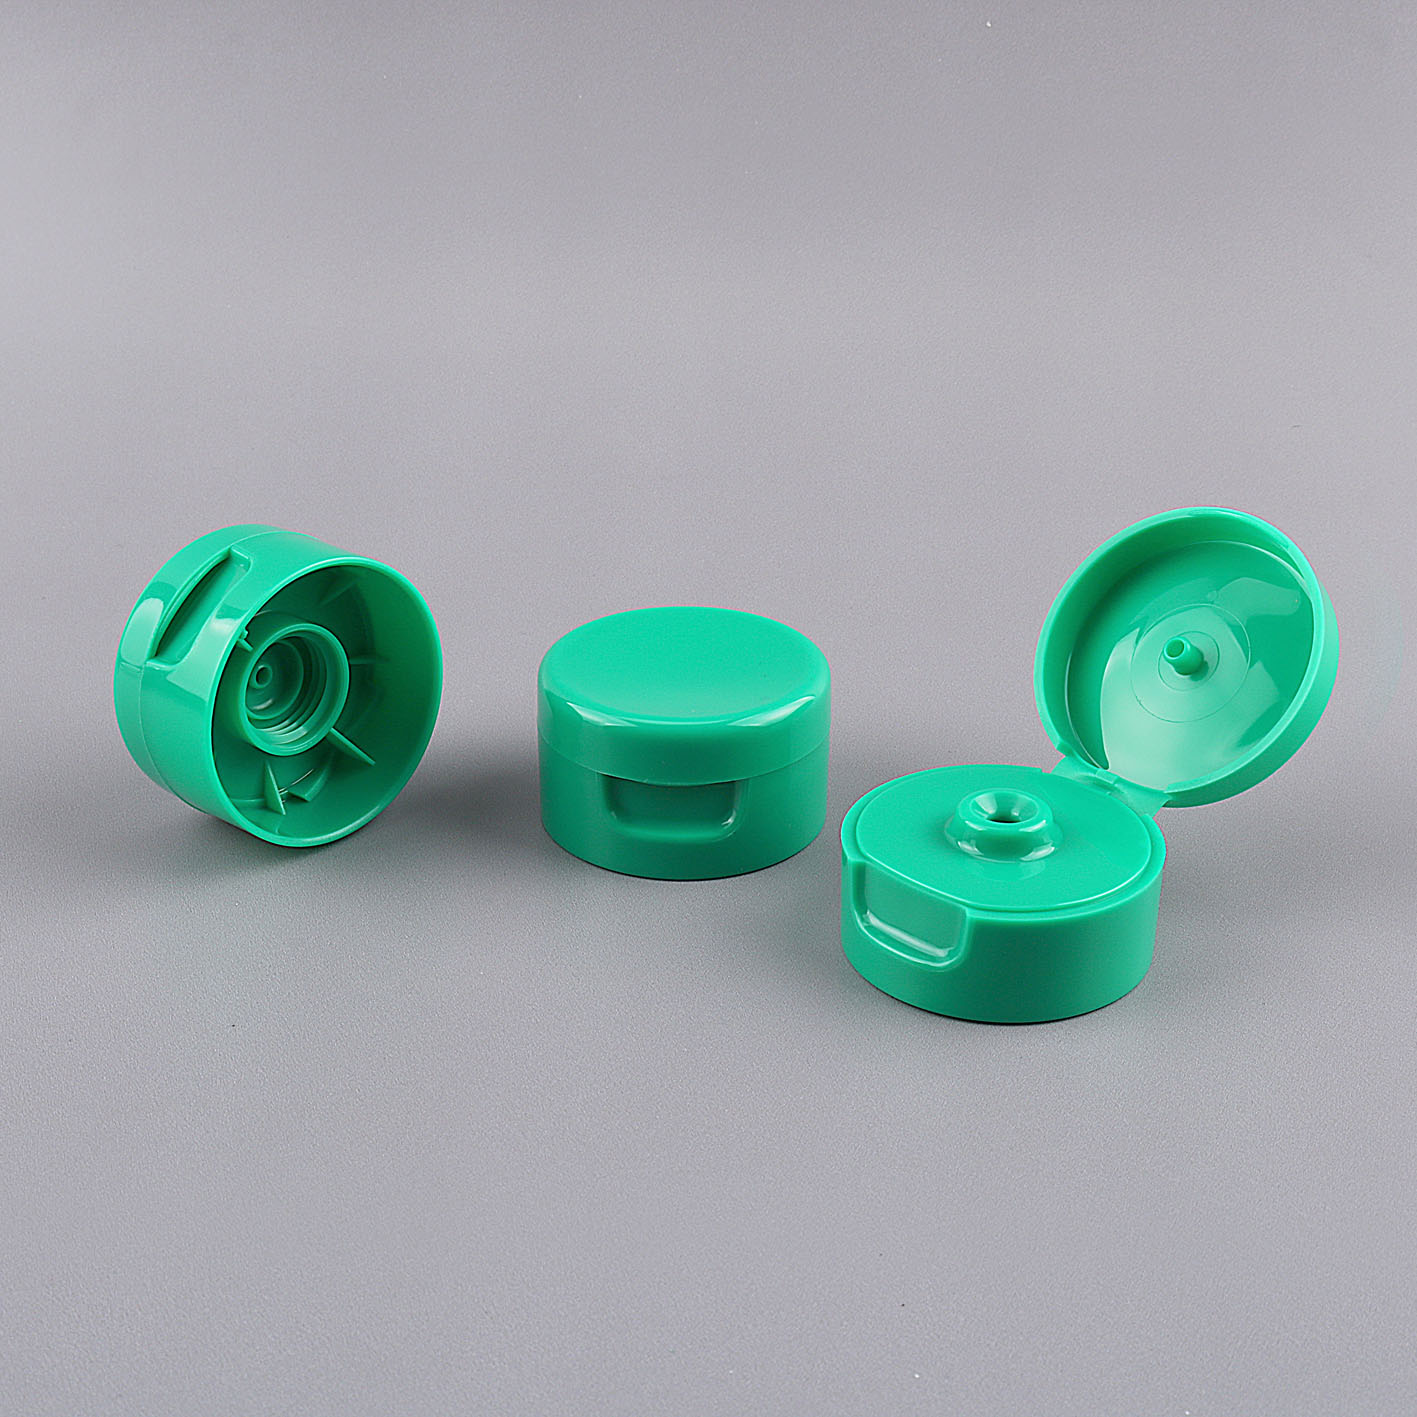 40mm_Diameter_Customized_Cleanser_Tubes_with_Glossy_Flip_Top_Caps4